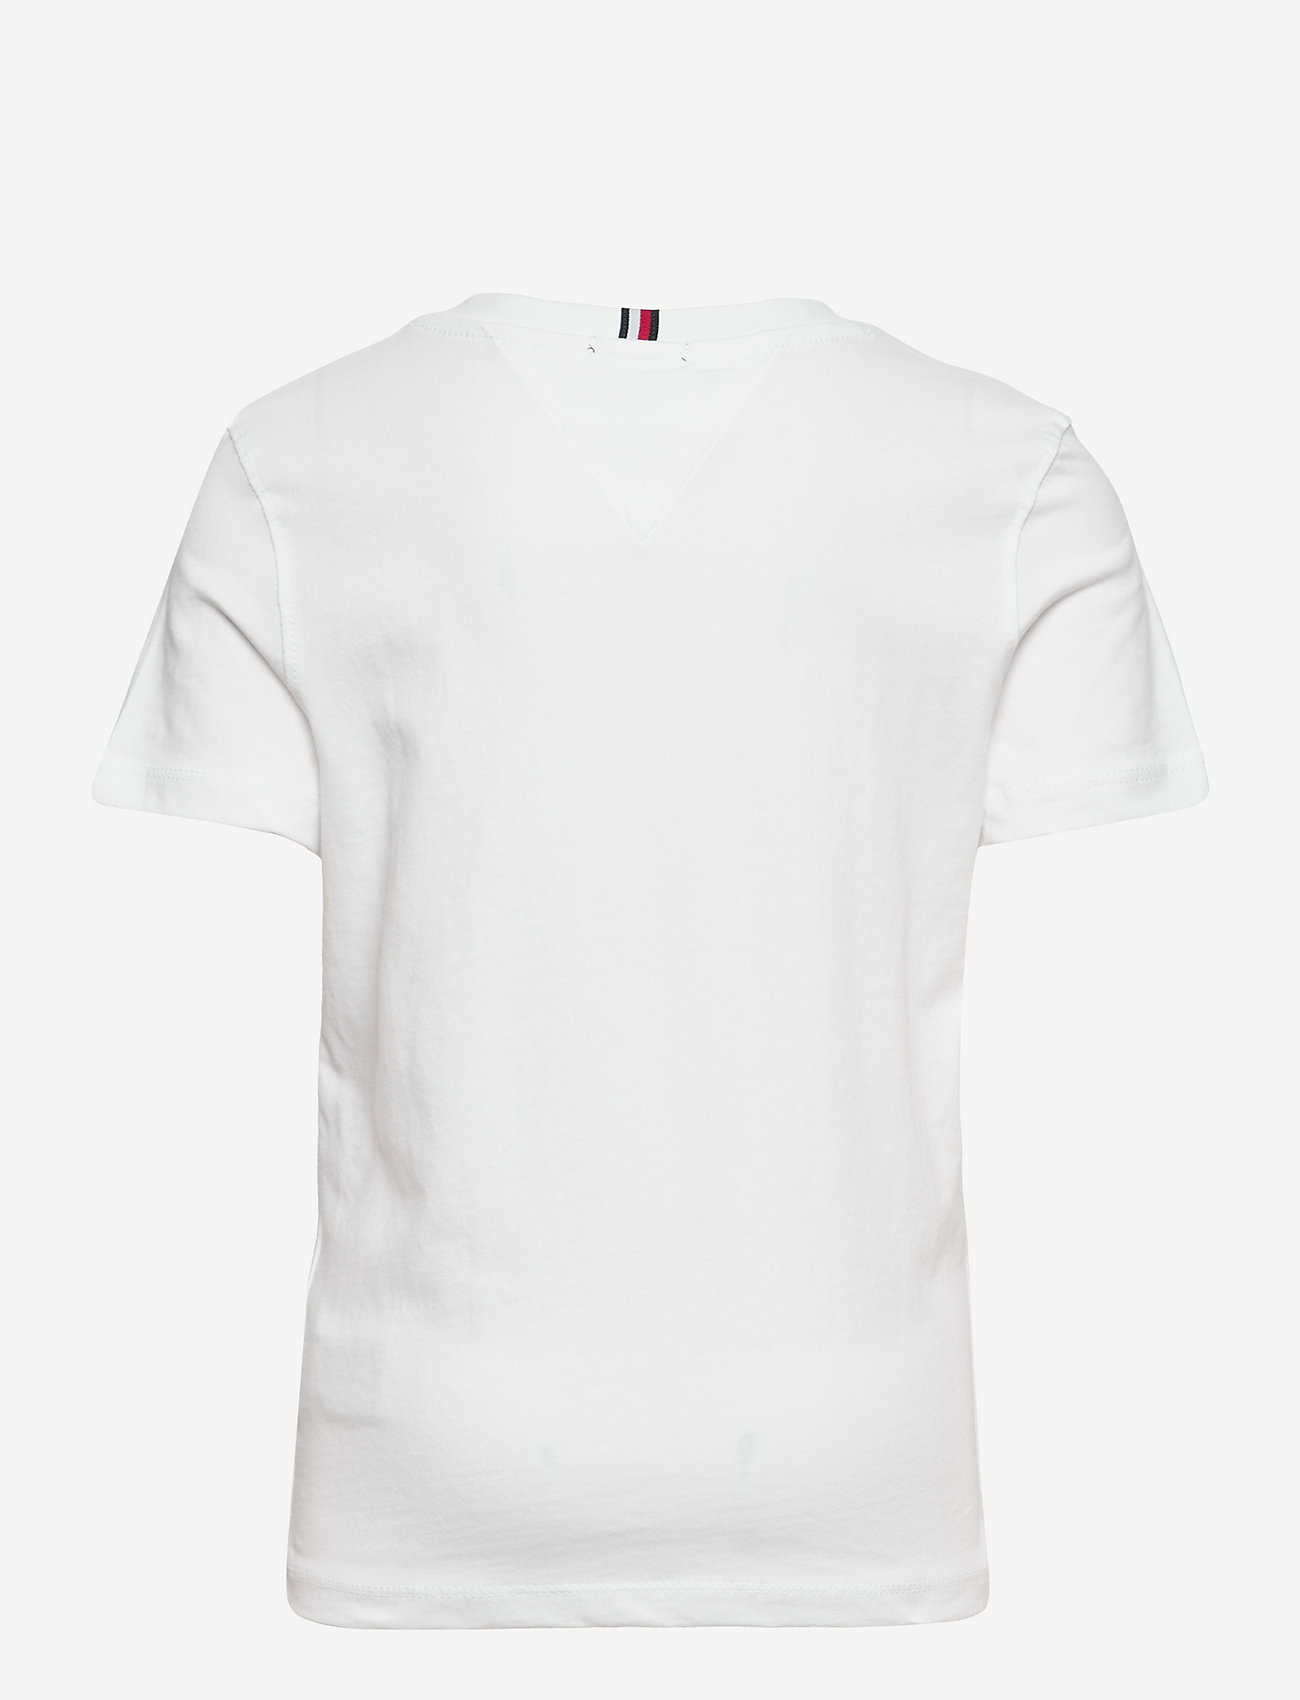 Tommy Hilfiger - TH LOGO TEE S/S - short-sleeved - white - 1